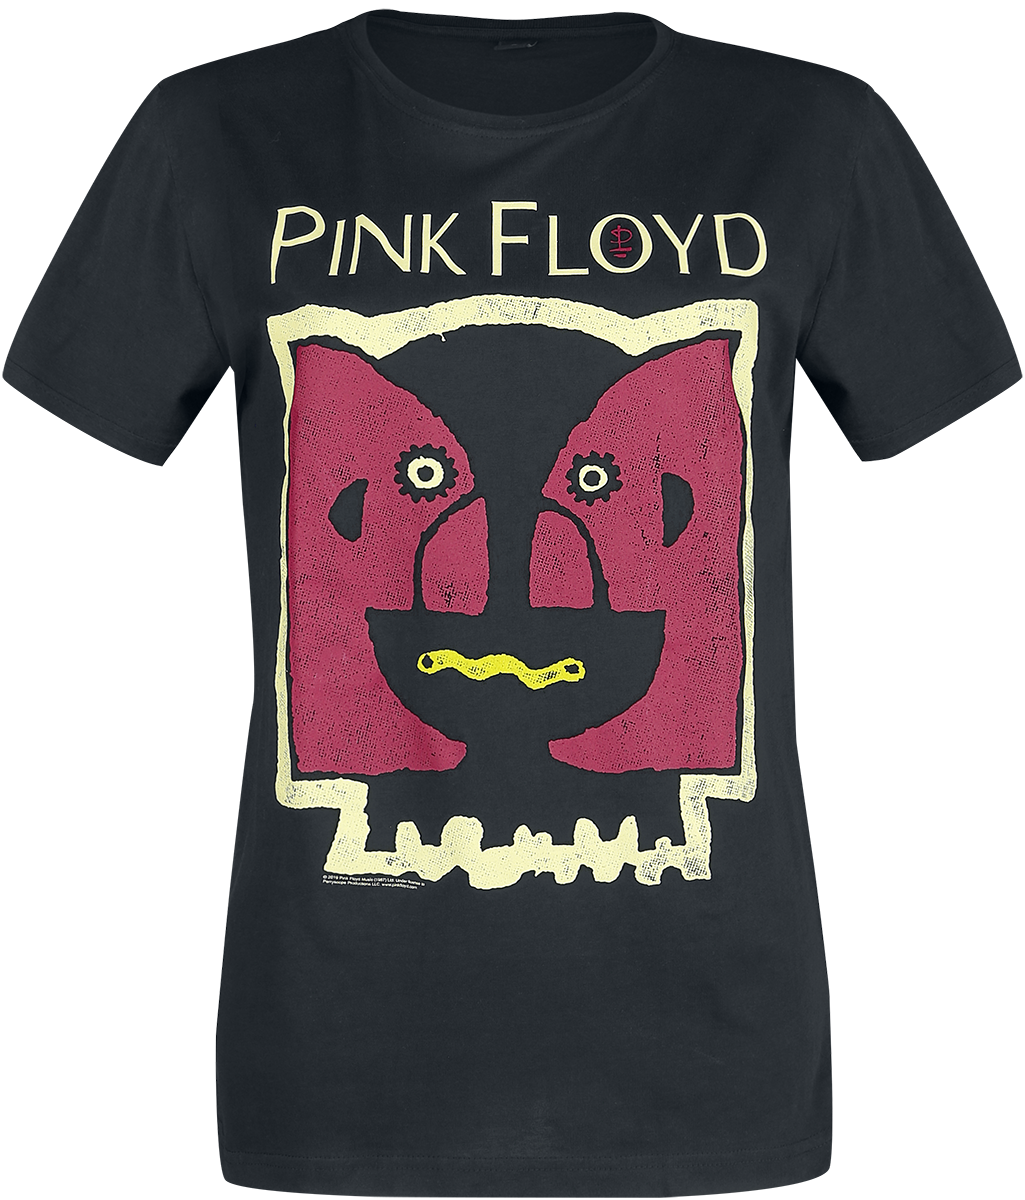 Pink Floyd - Division Bell Painted - Girls shirt - black image